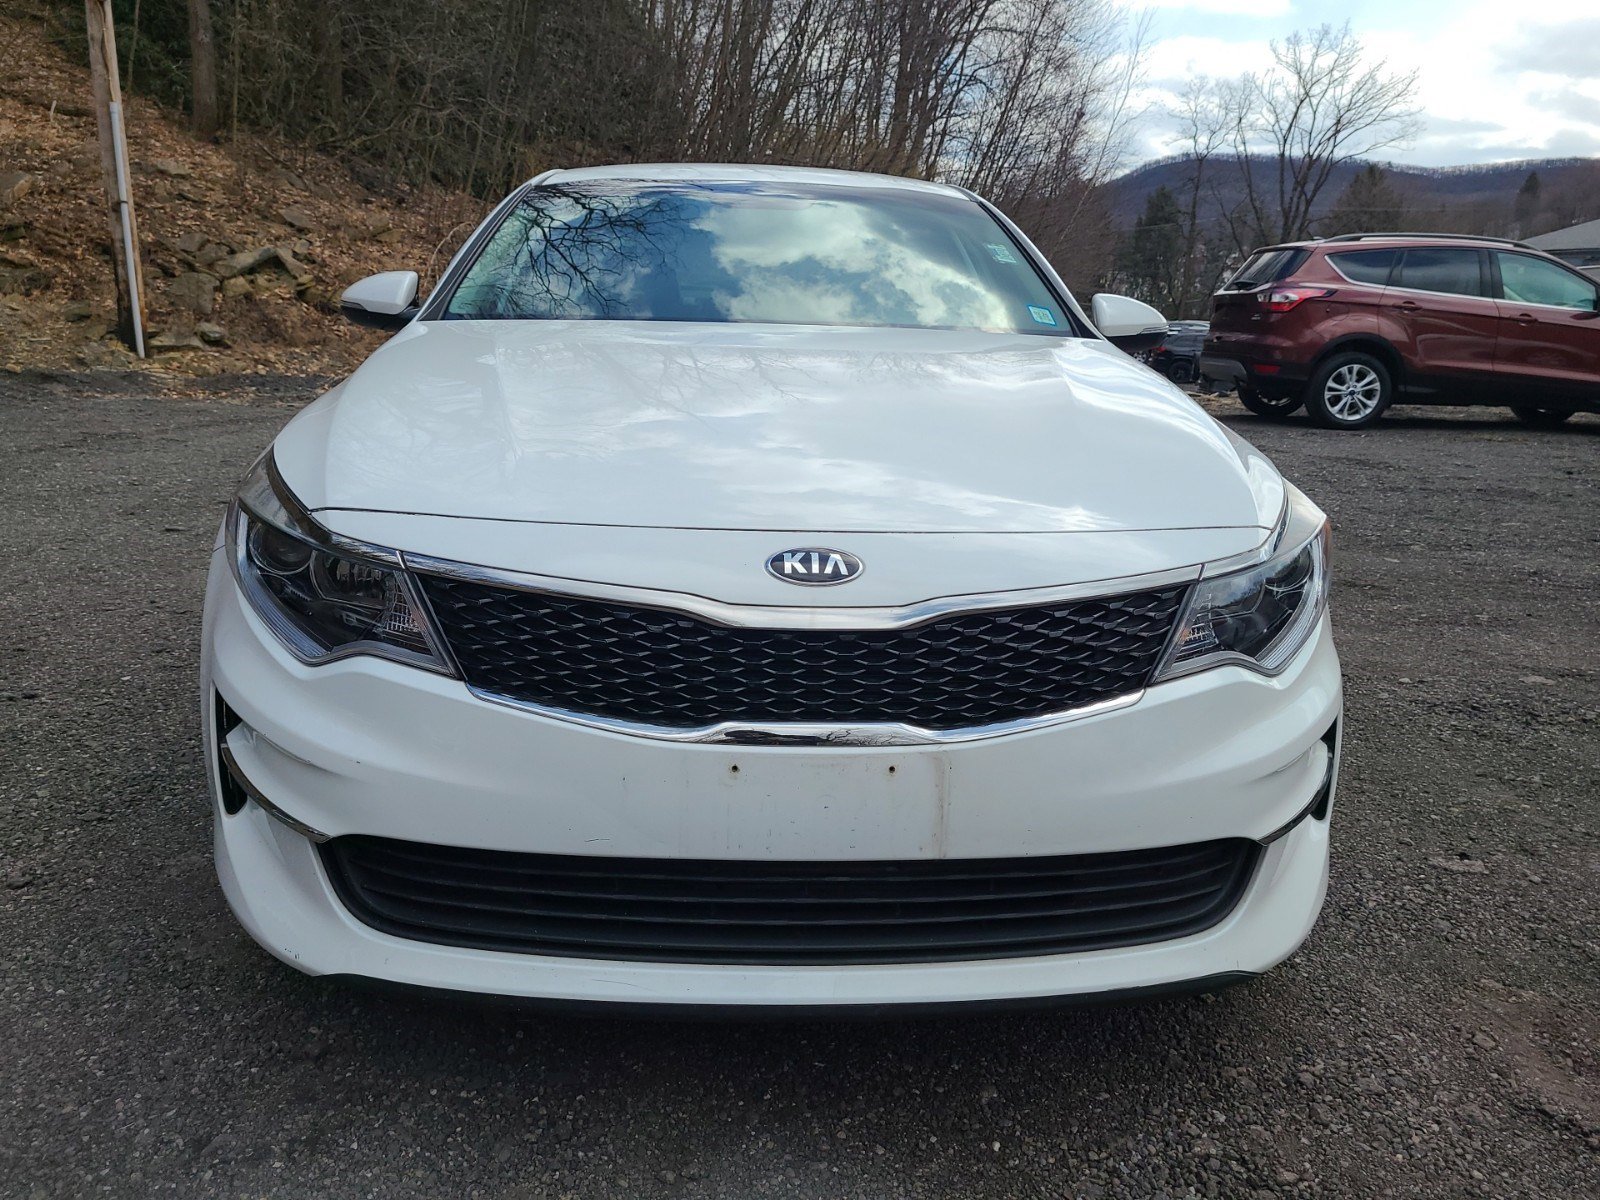 Used 2016 Kia Optima LX with VIN 5XXGT4L38GG015695 for sale in Tamaqua, PA